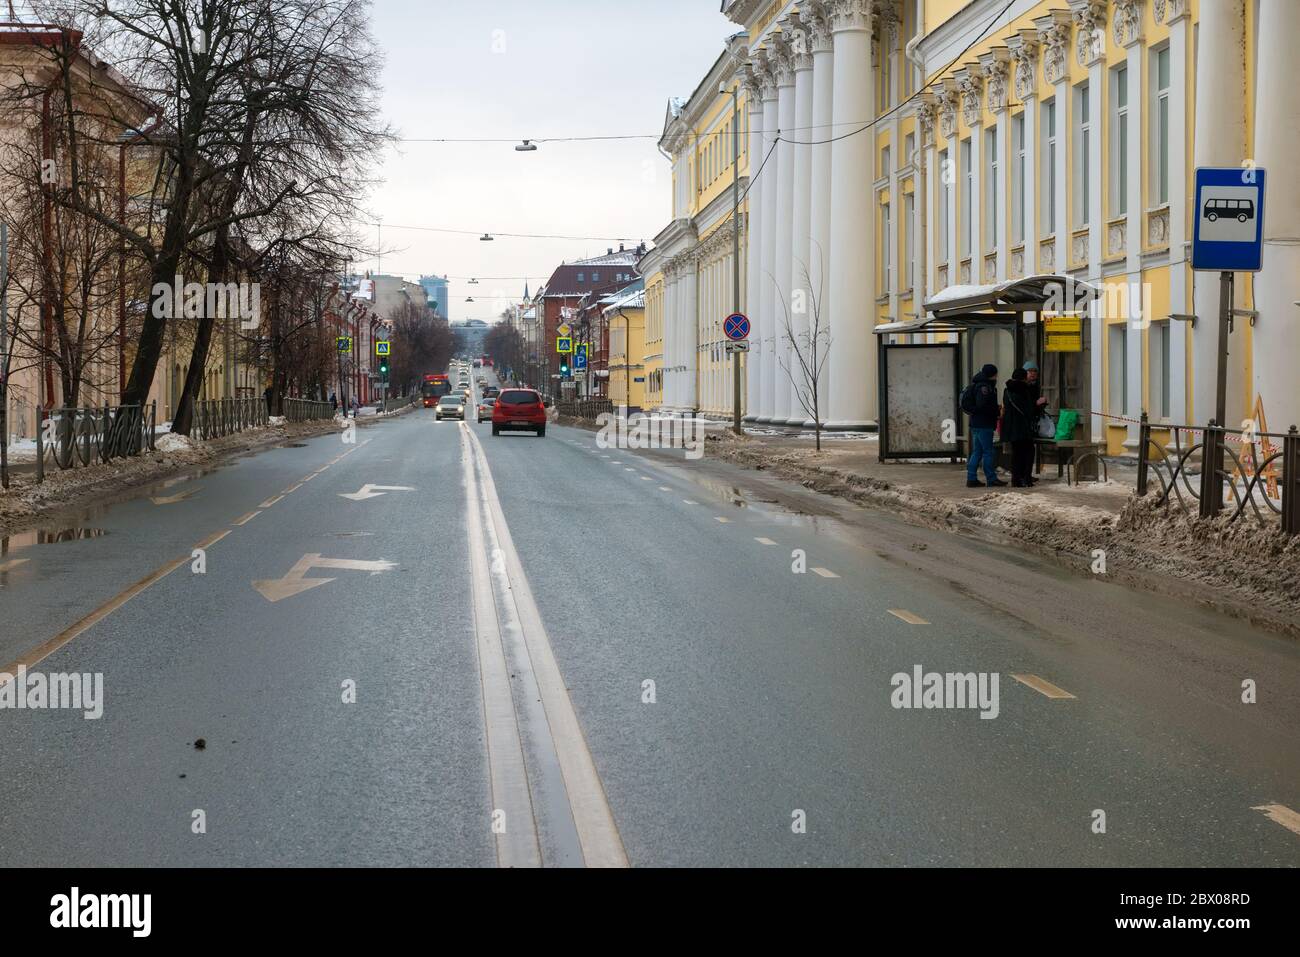 KAZAN, RUSSIA - JANUARY 5 2020: View of car traffic on Karl Marx Street during the day in cloudy weather Stock Photo